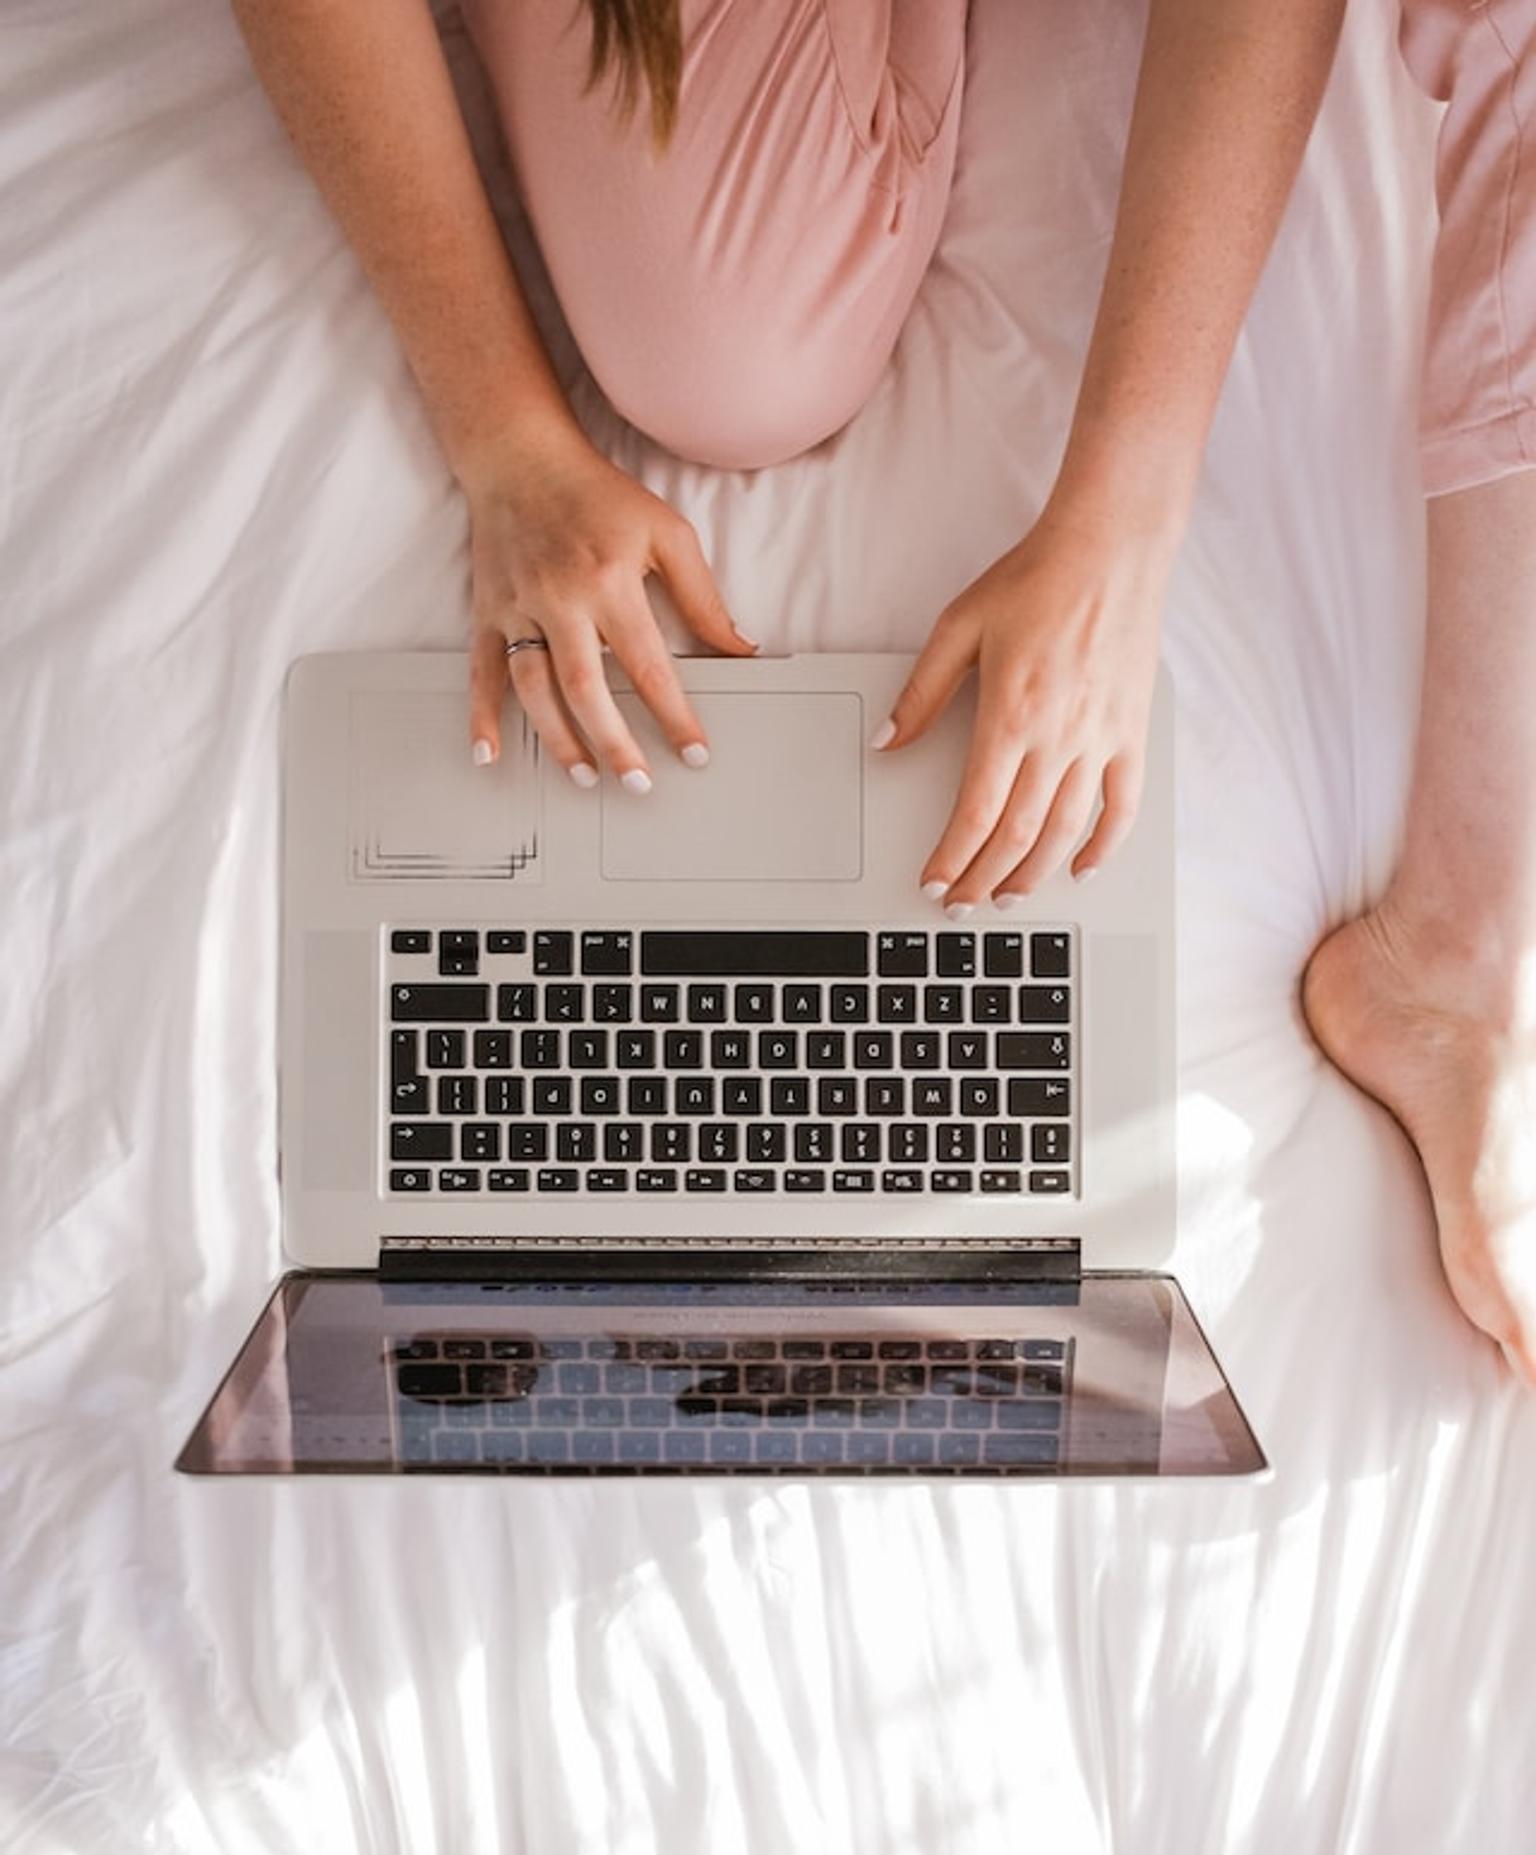 Person searching on web through a laptop in the bed